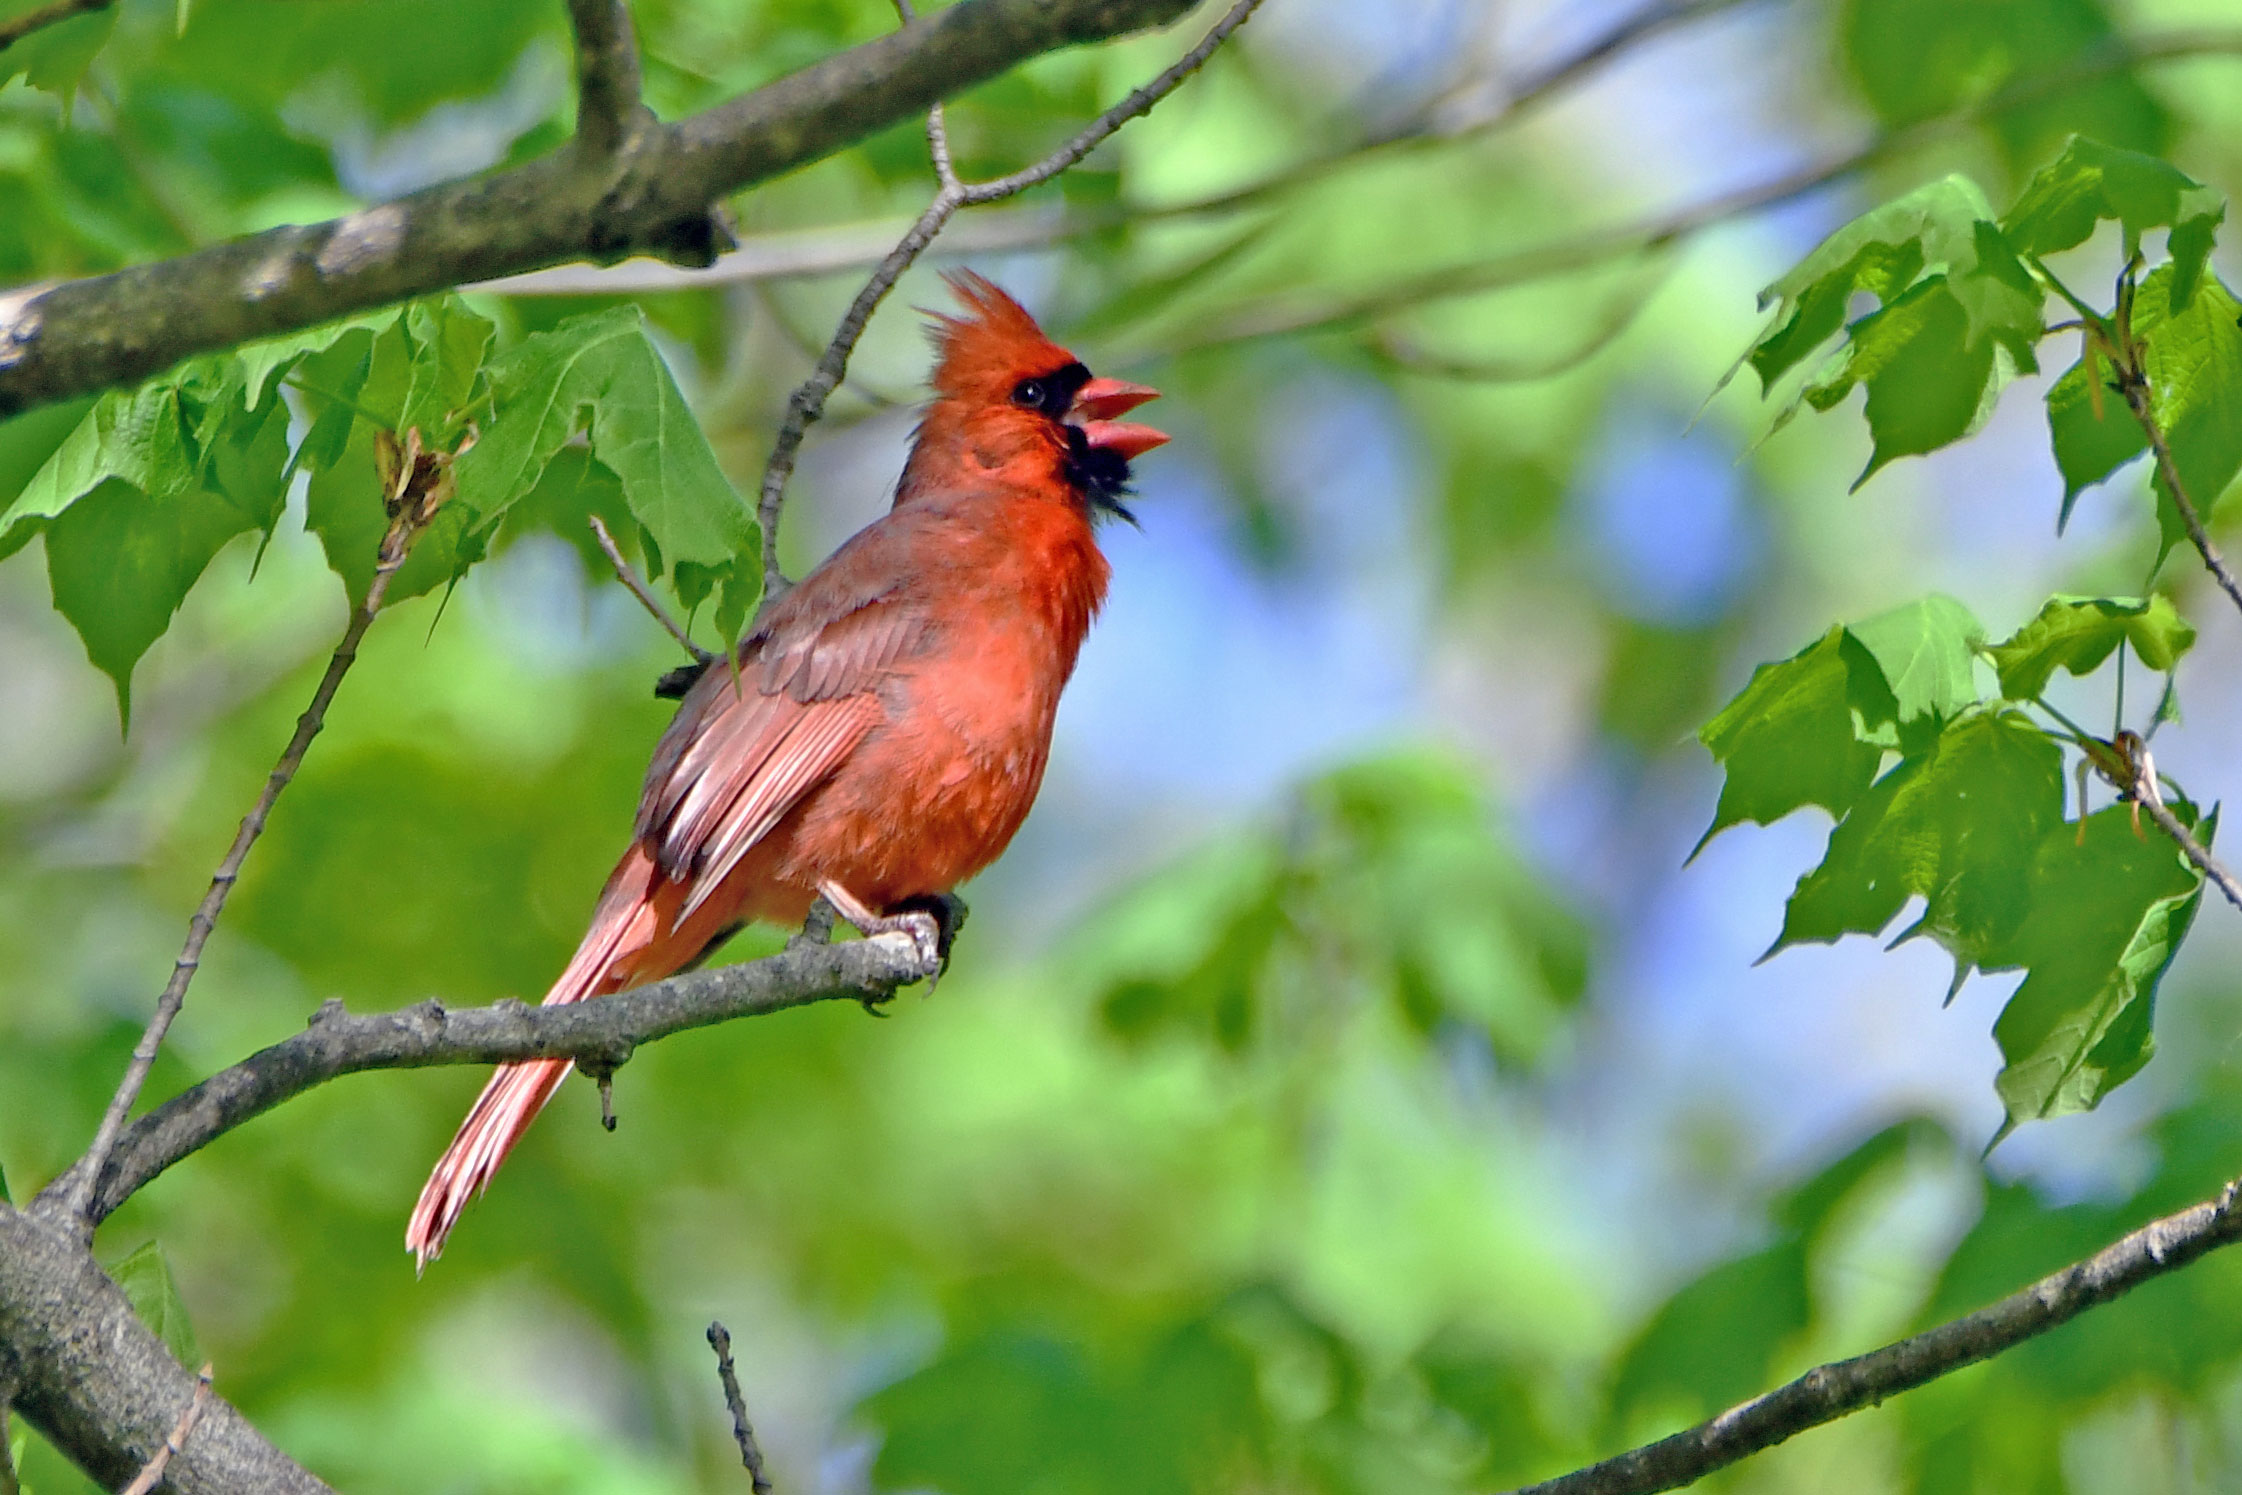 A cardinal perched on a branch.